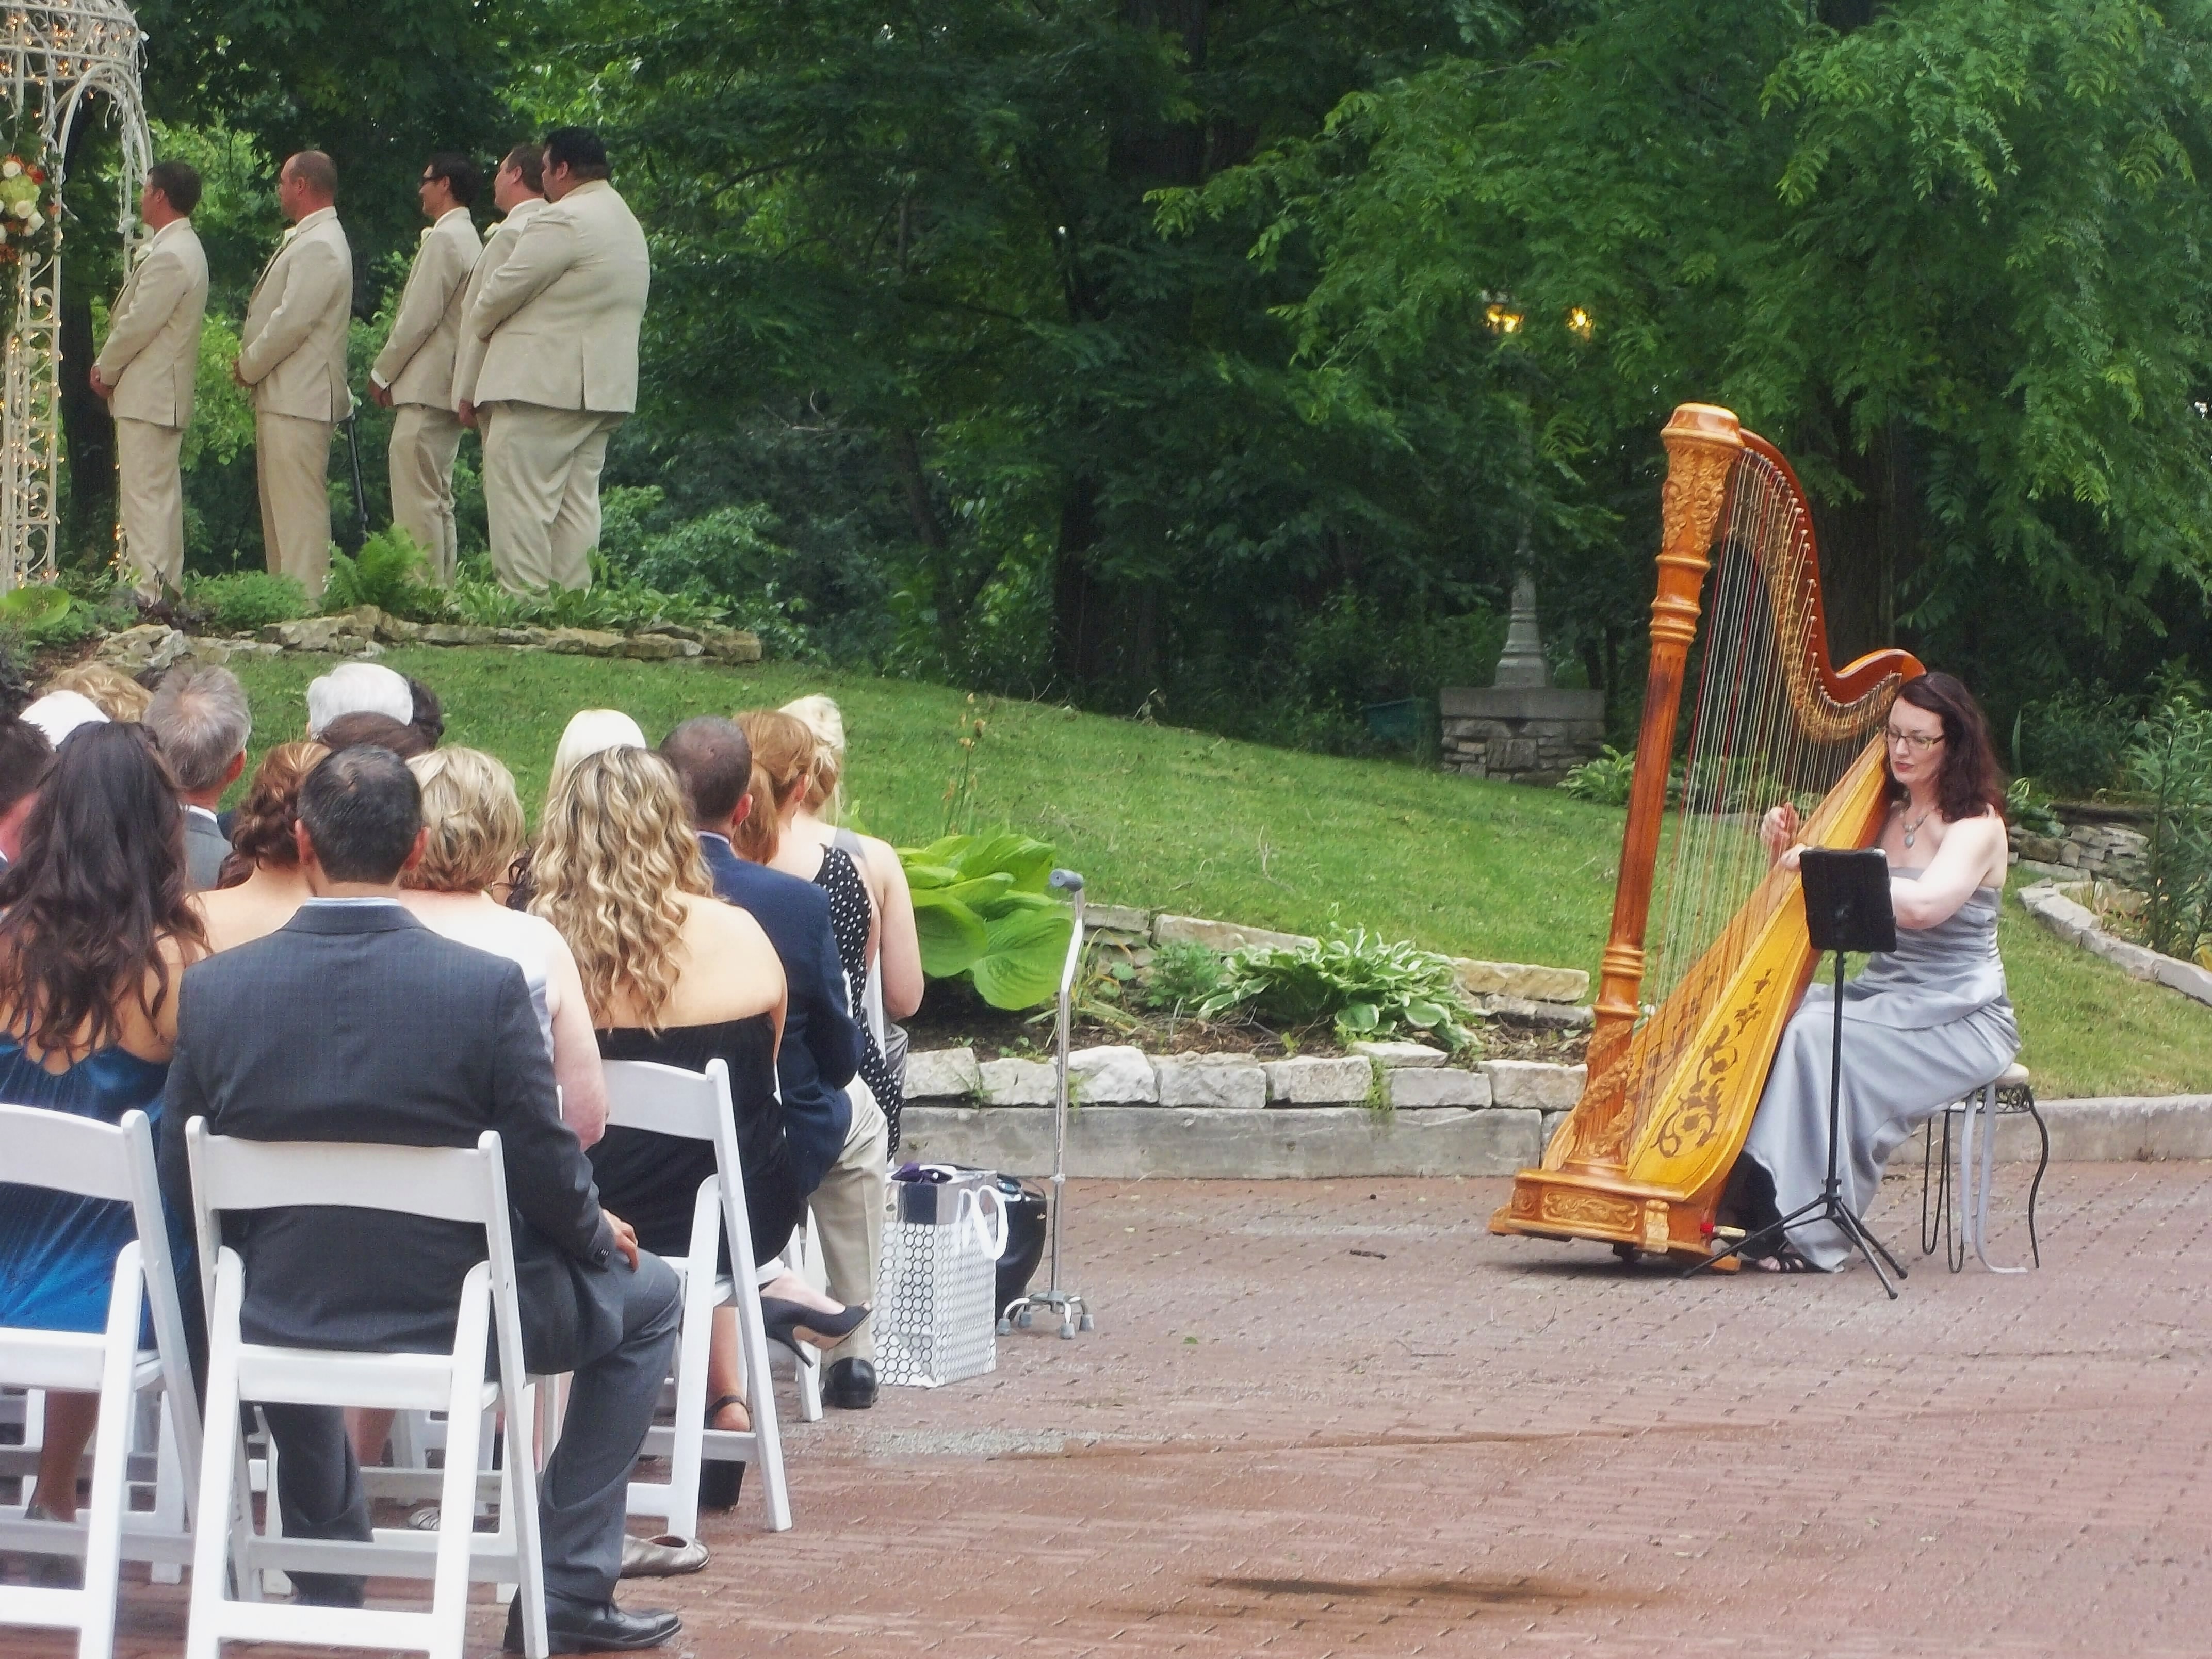 Non-classical music for wedding ceremony